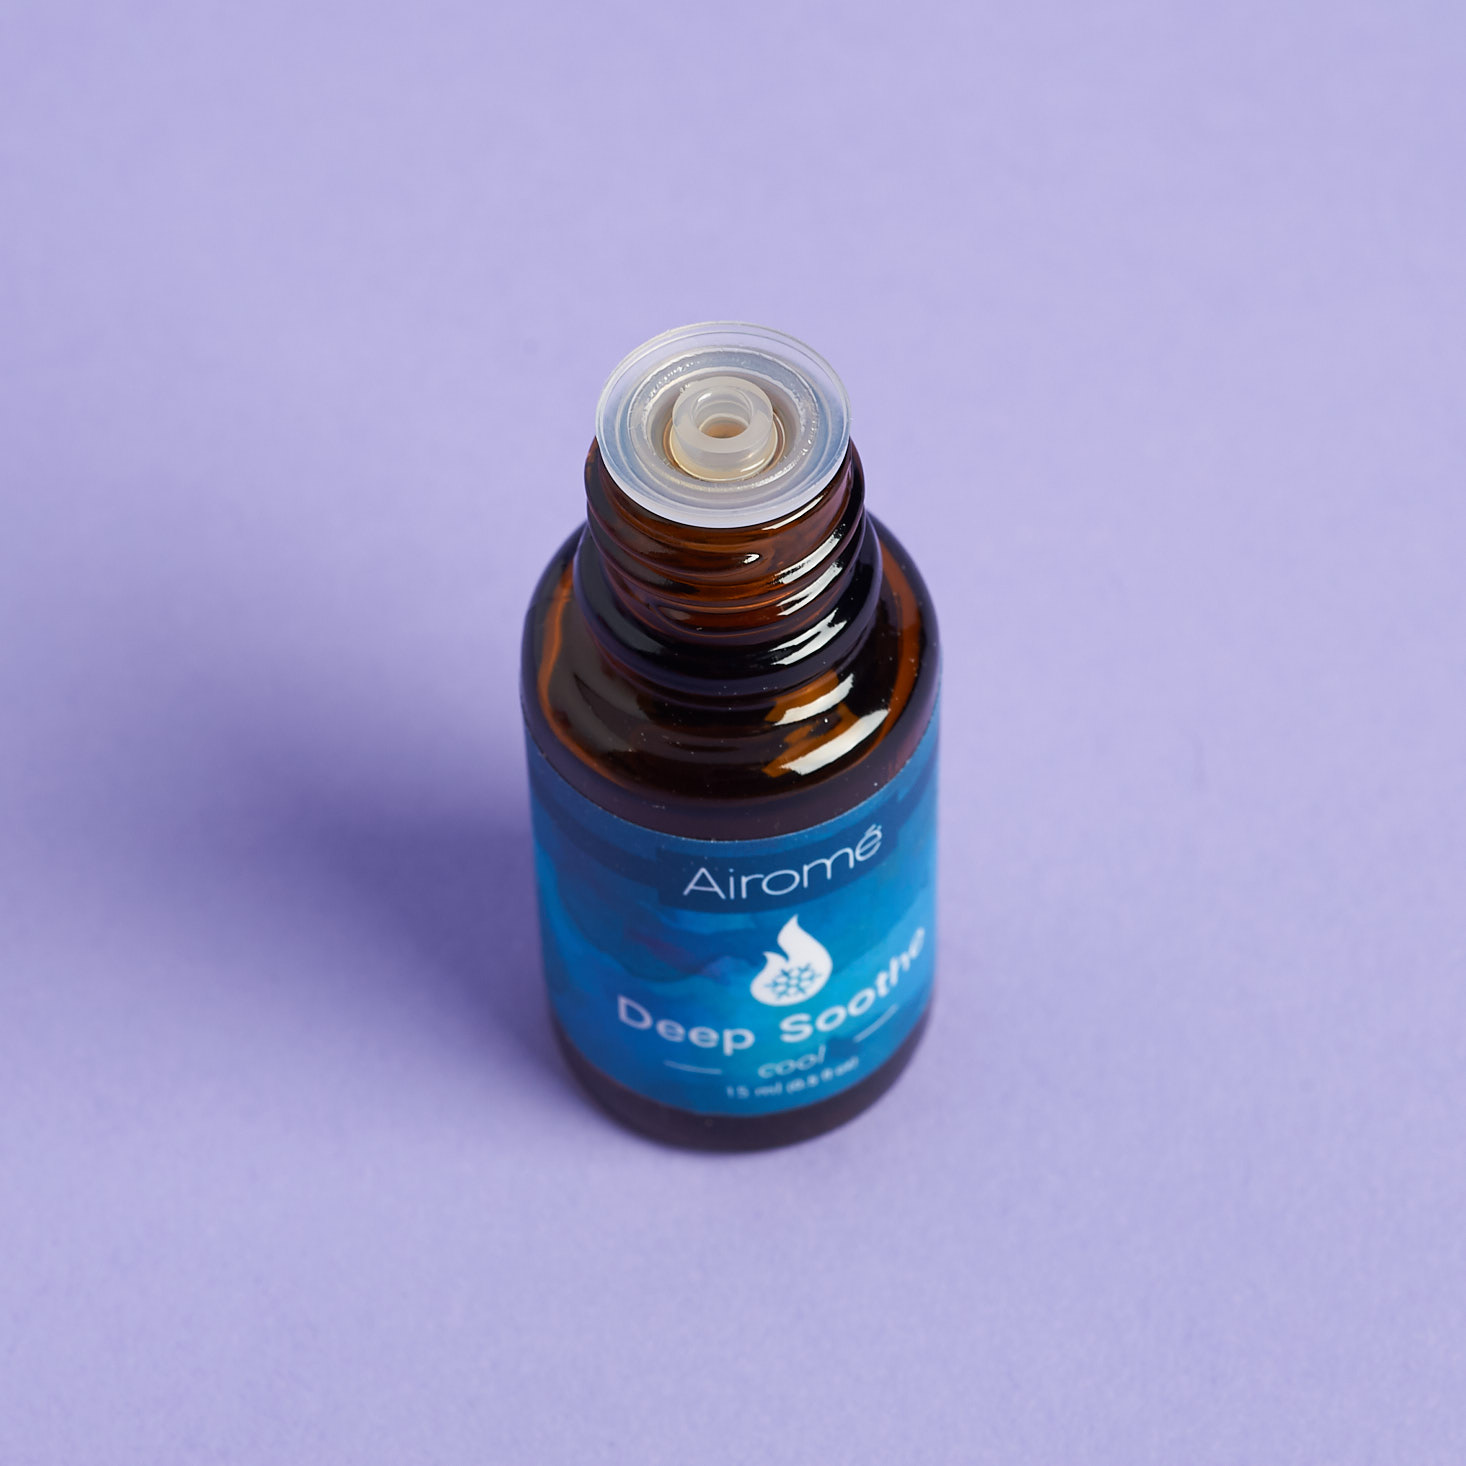 Heart and Honey May 2019 review essential oil open